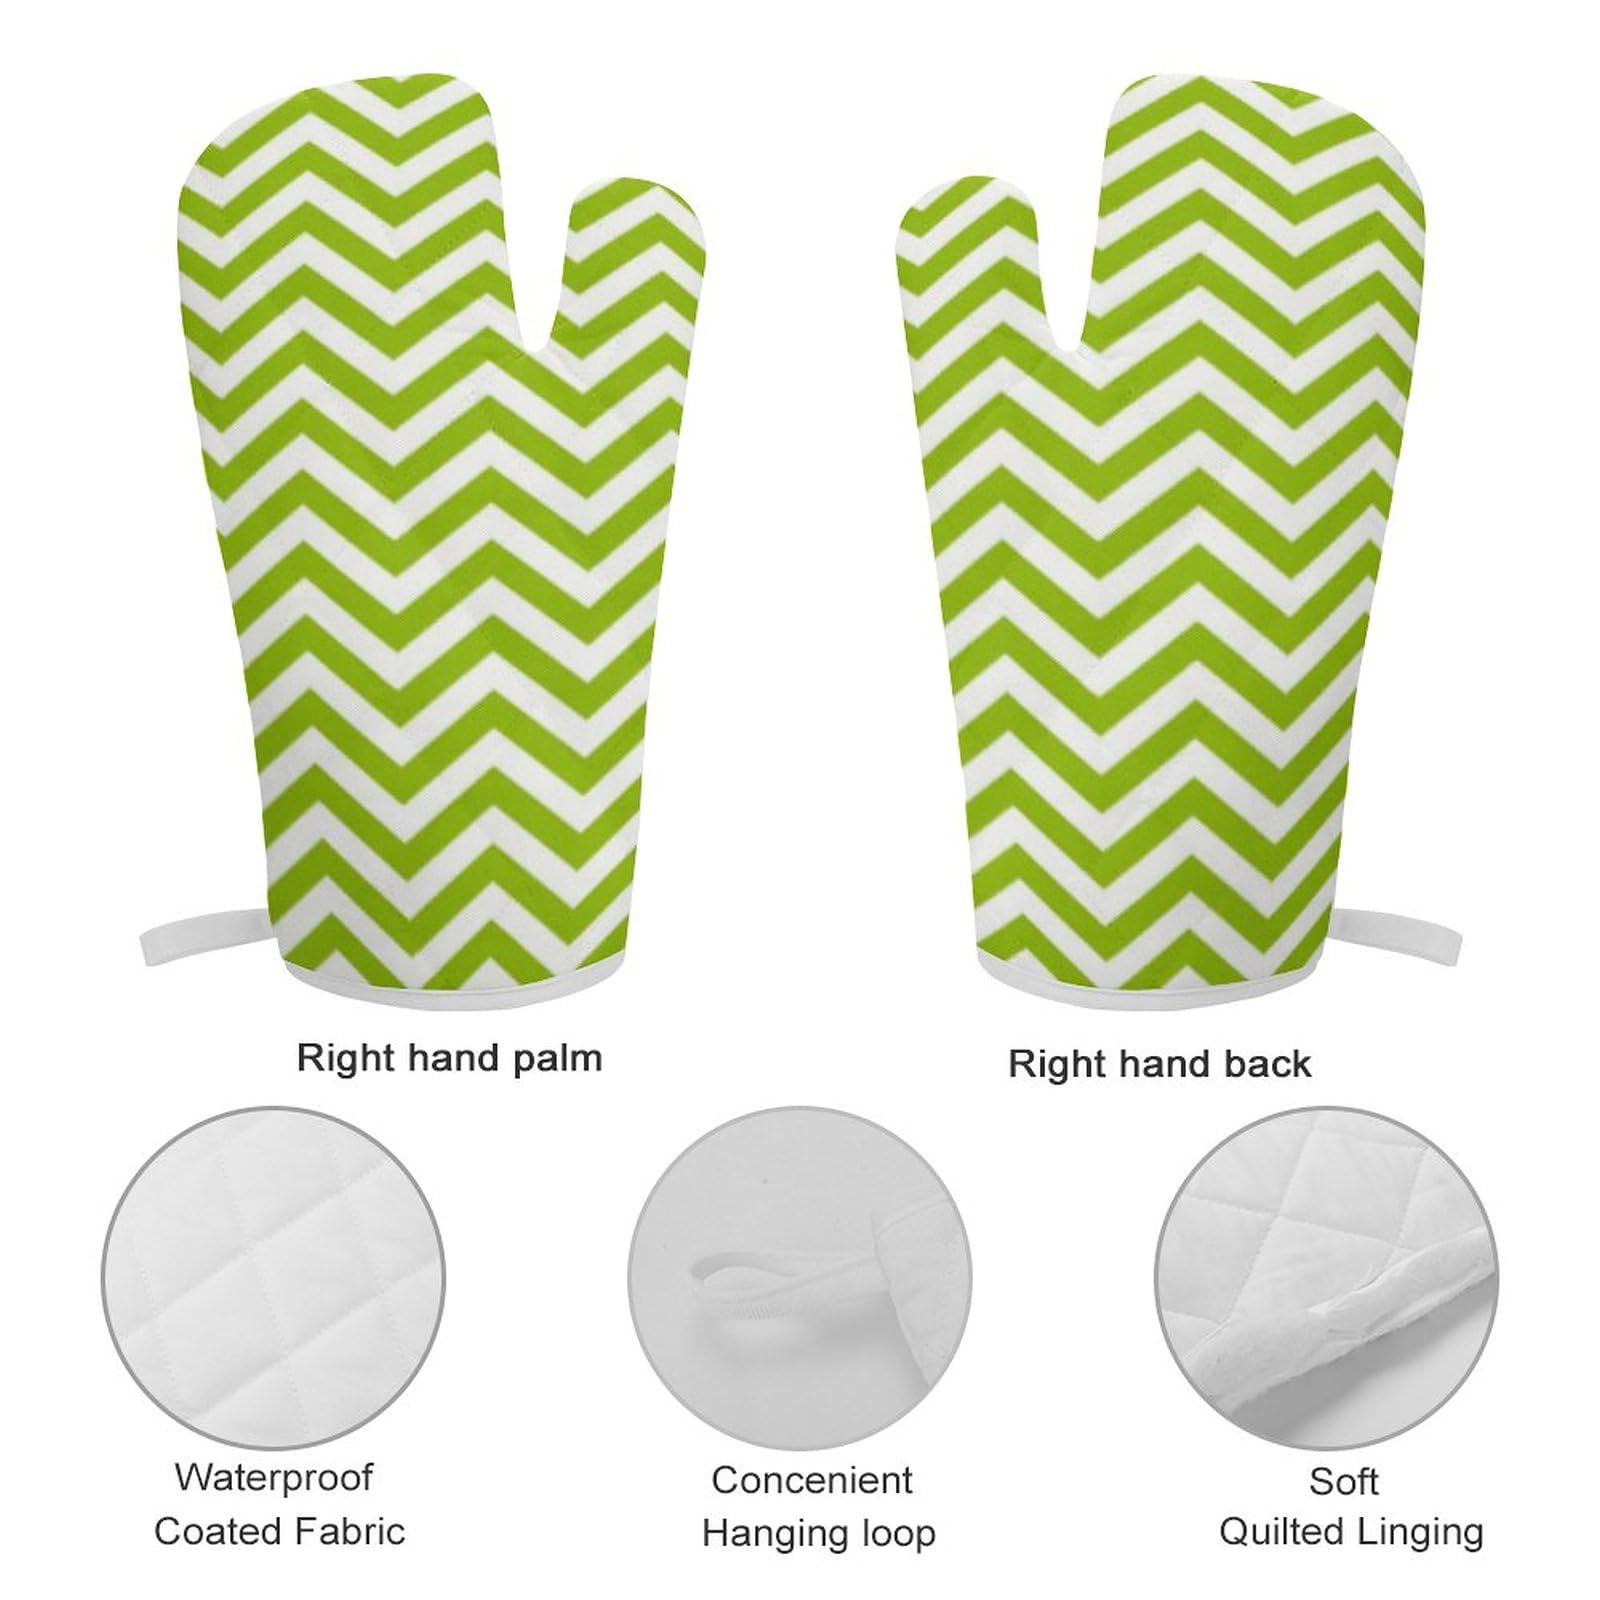 2Pcs Oven Mitts and Pot Holders Set, Retro Apple Green Chevron Stripes Oven Mitts Gloves Set Heat Resistant Hot Pads for Kitchen Cooking Grill